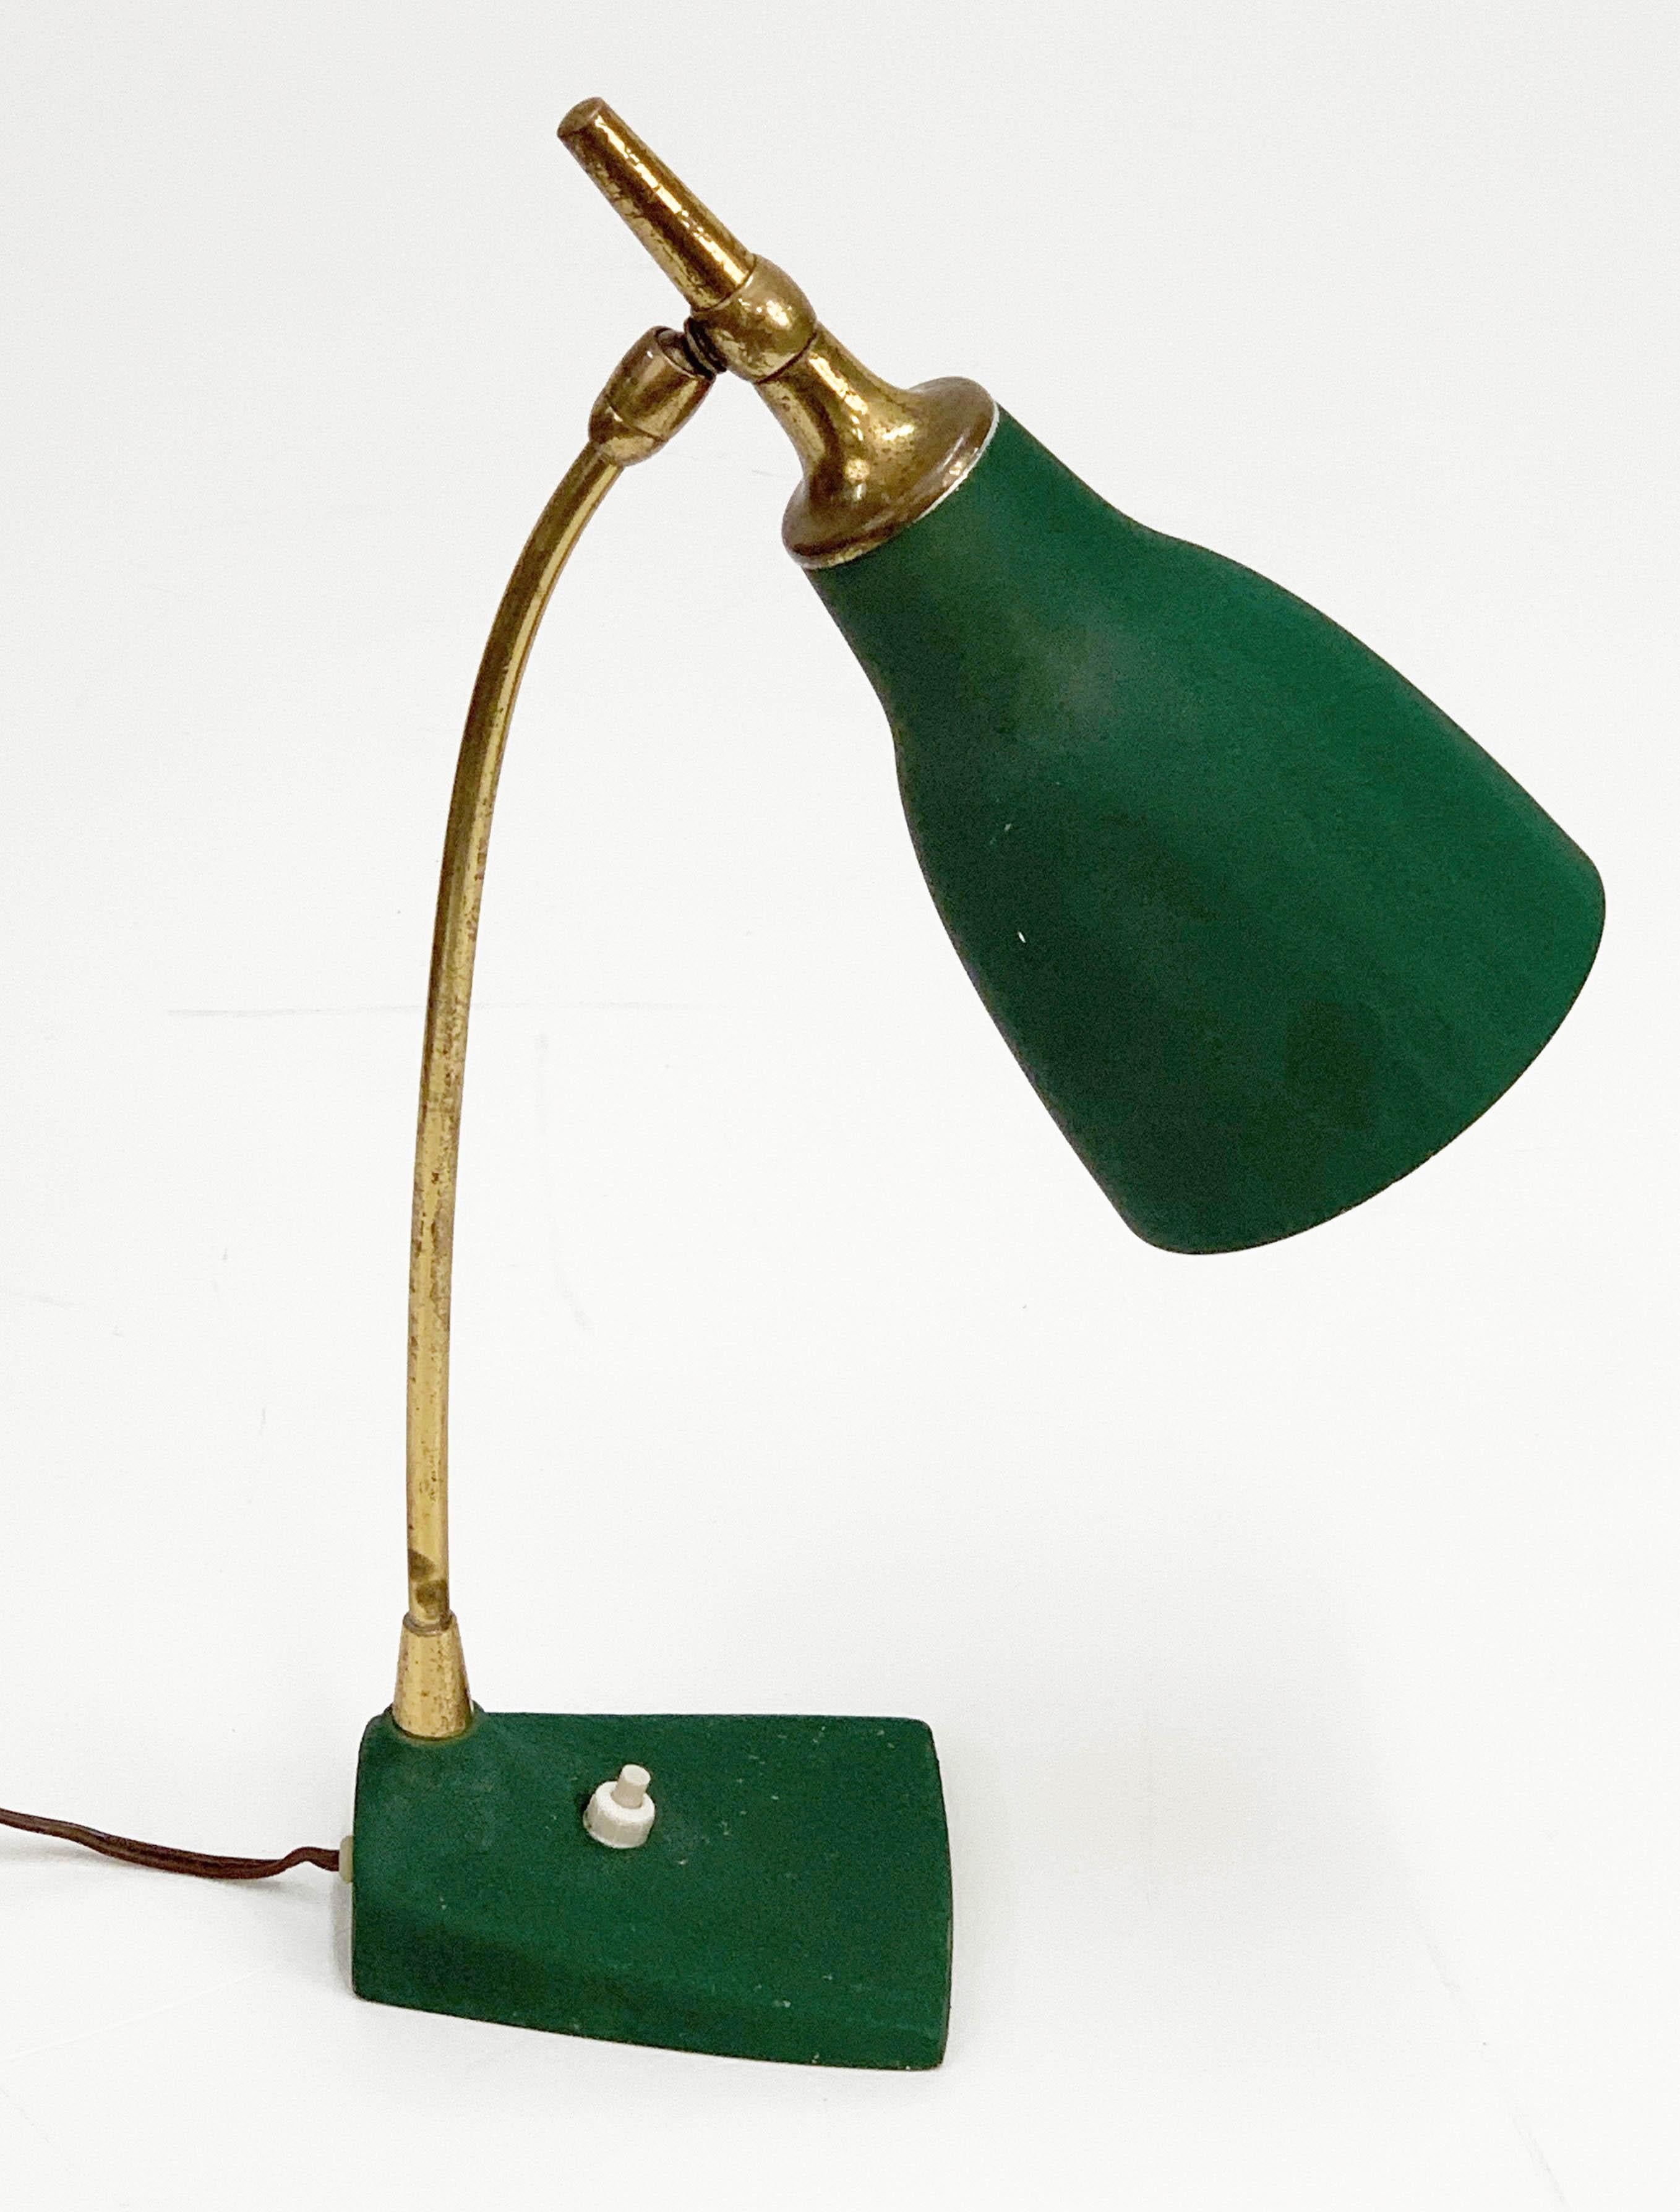 Midcentury Gebrüder Cosack Adjustable Green Brass and Cast Iron Table Lamp 1950s For Sale 5